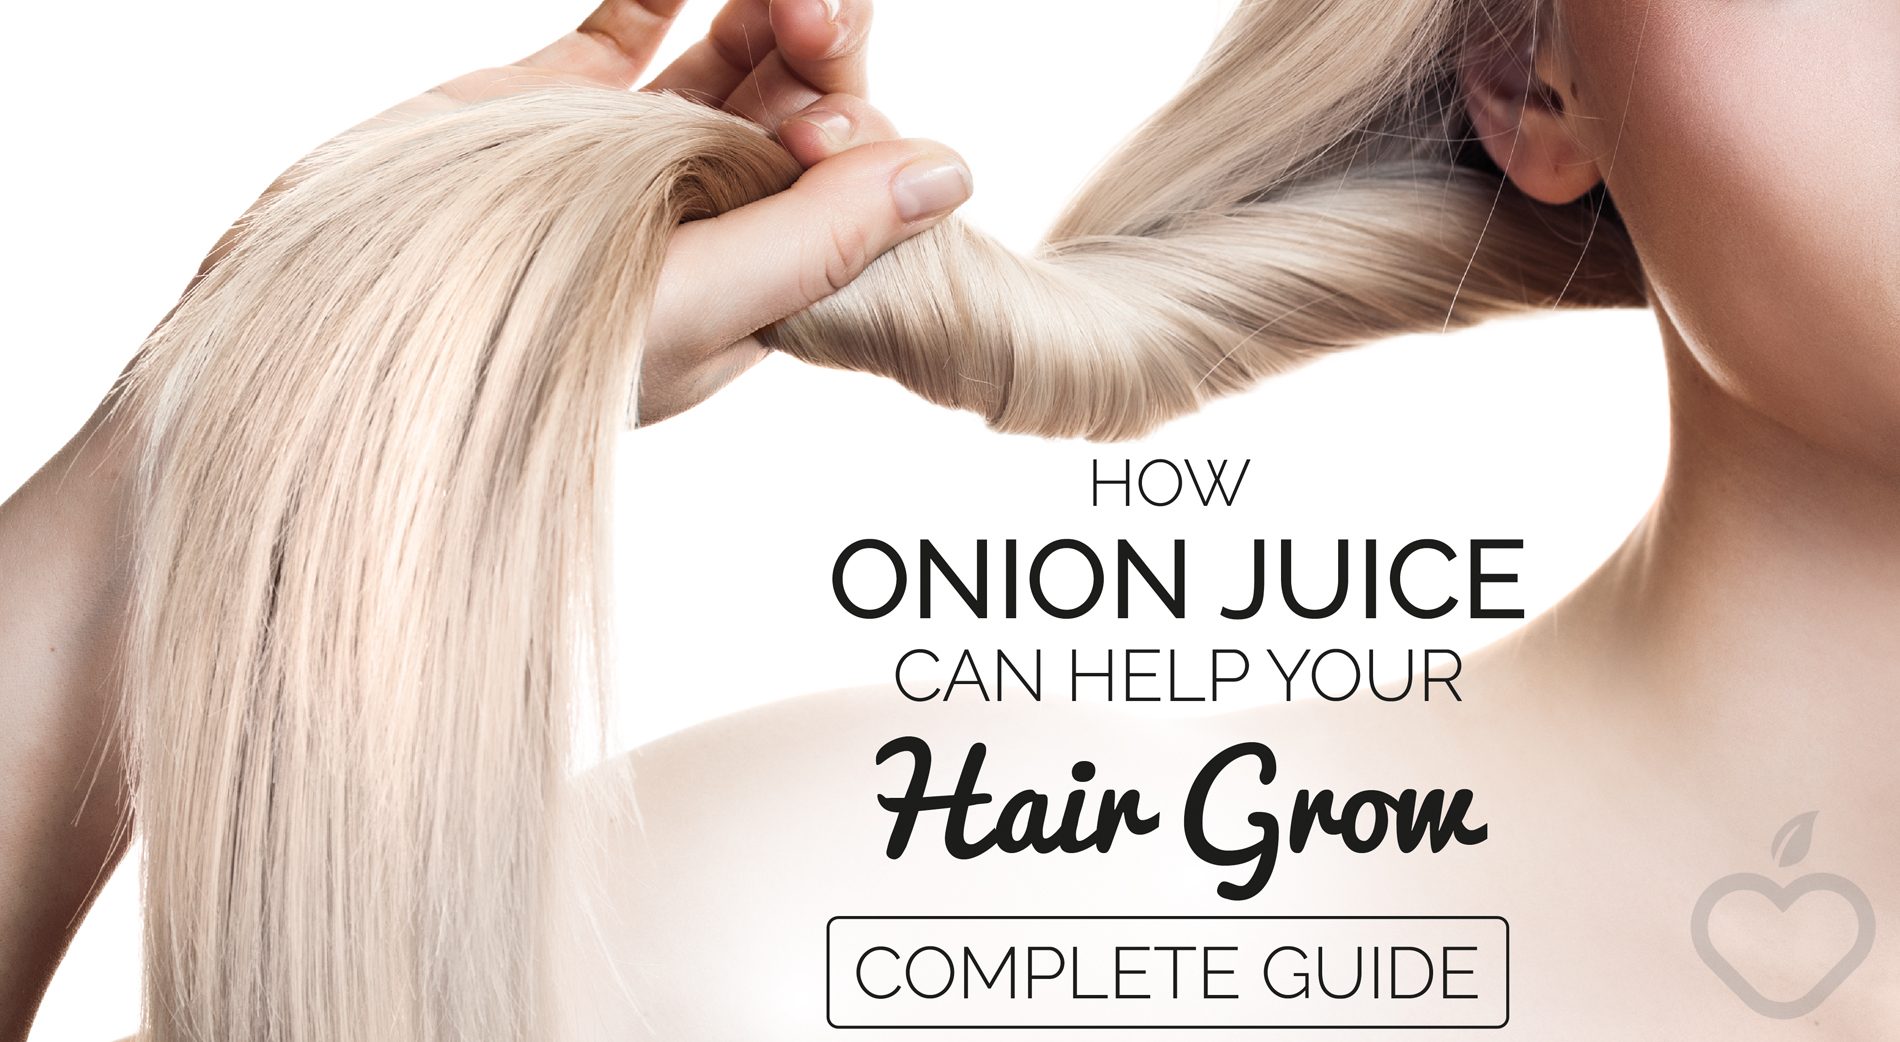 How Onion Juice Can Help Your Hair Grow (Complete Guide)